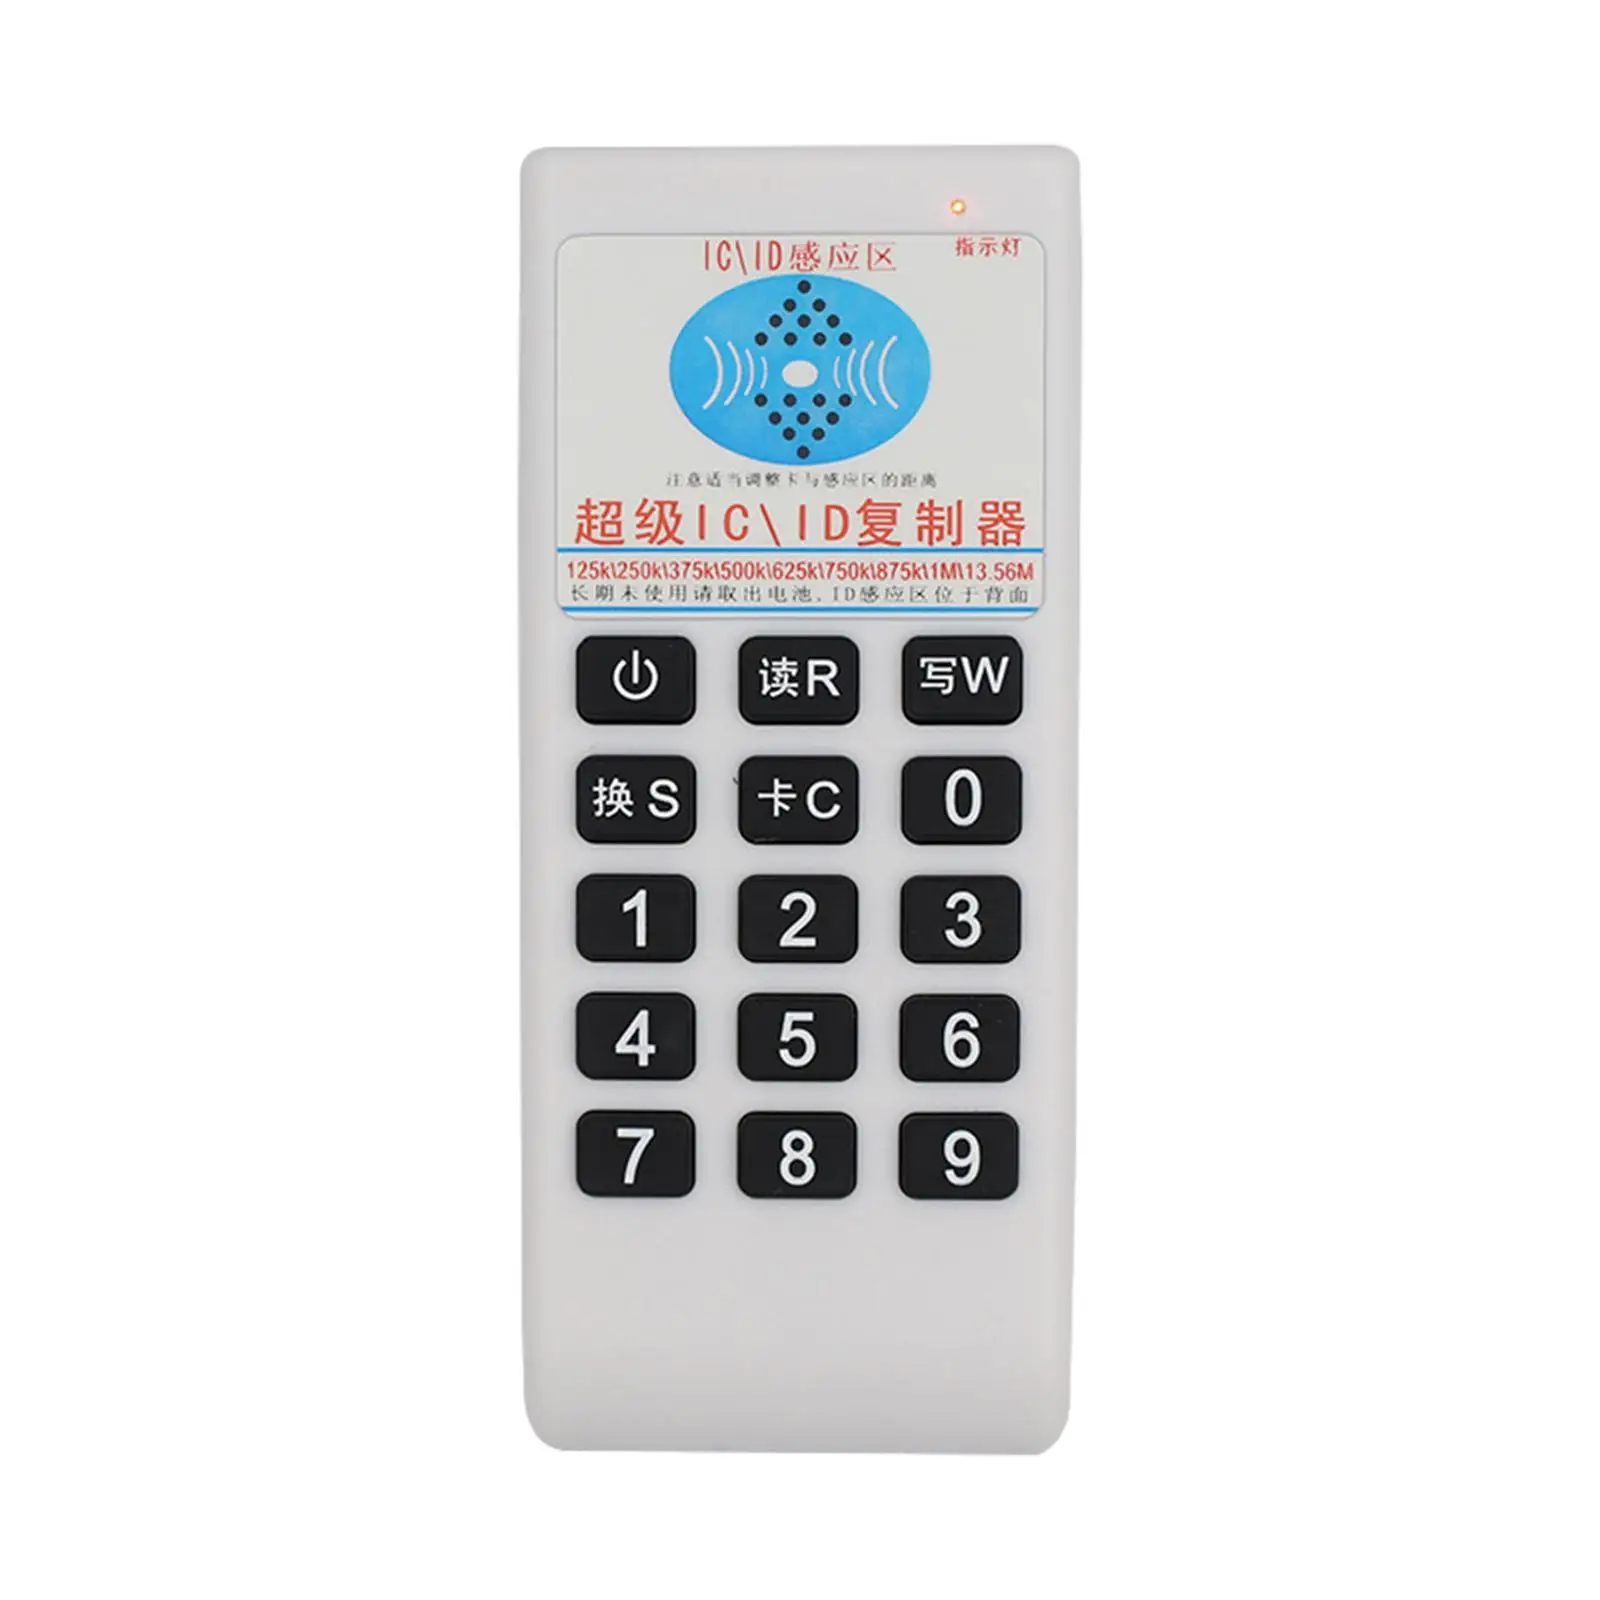 CARDS Reader Writer Lightweight Encrypted Cards Machine Stable Performance Voice Broadcast Function with LED Indicator Copier